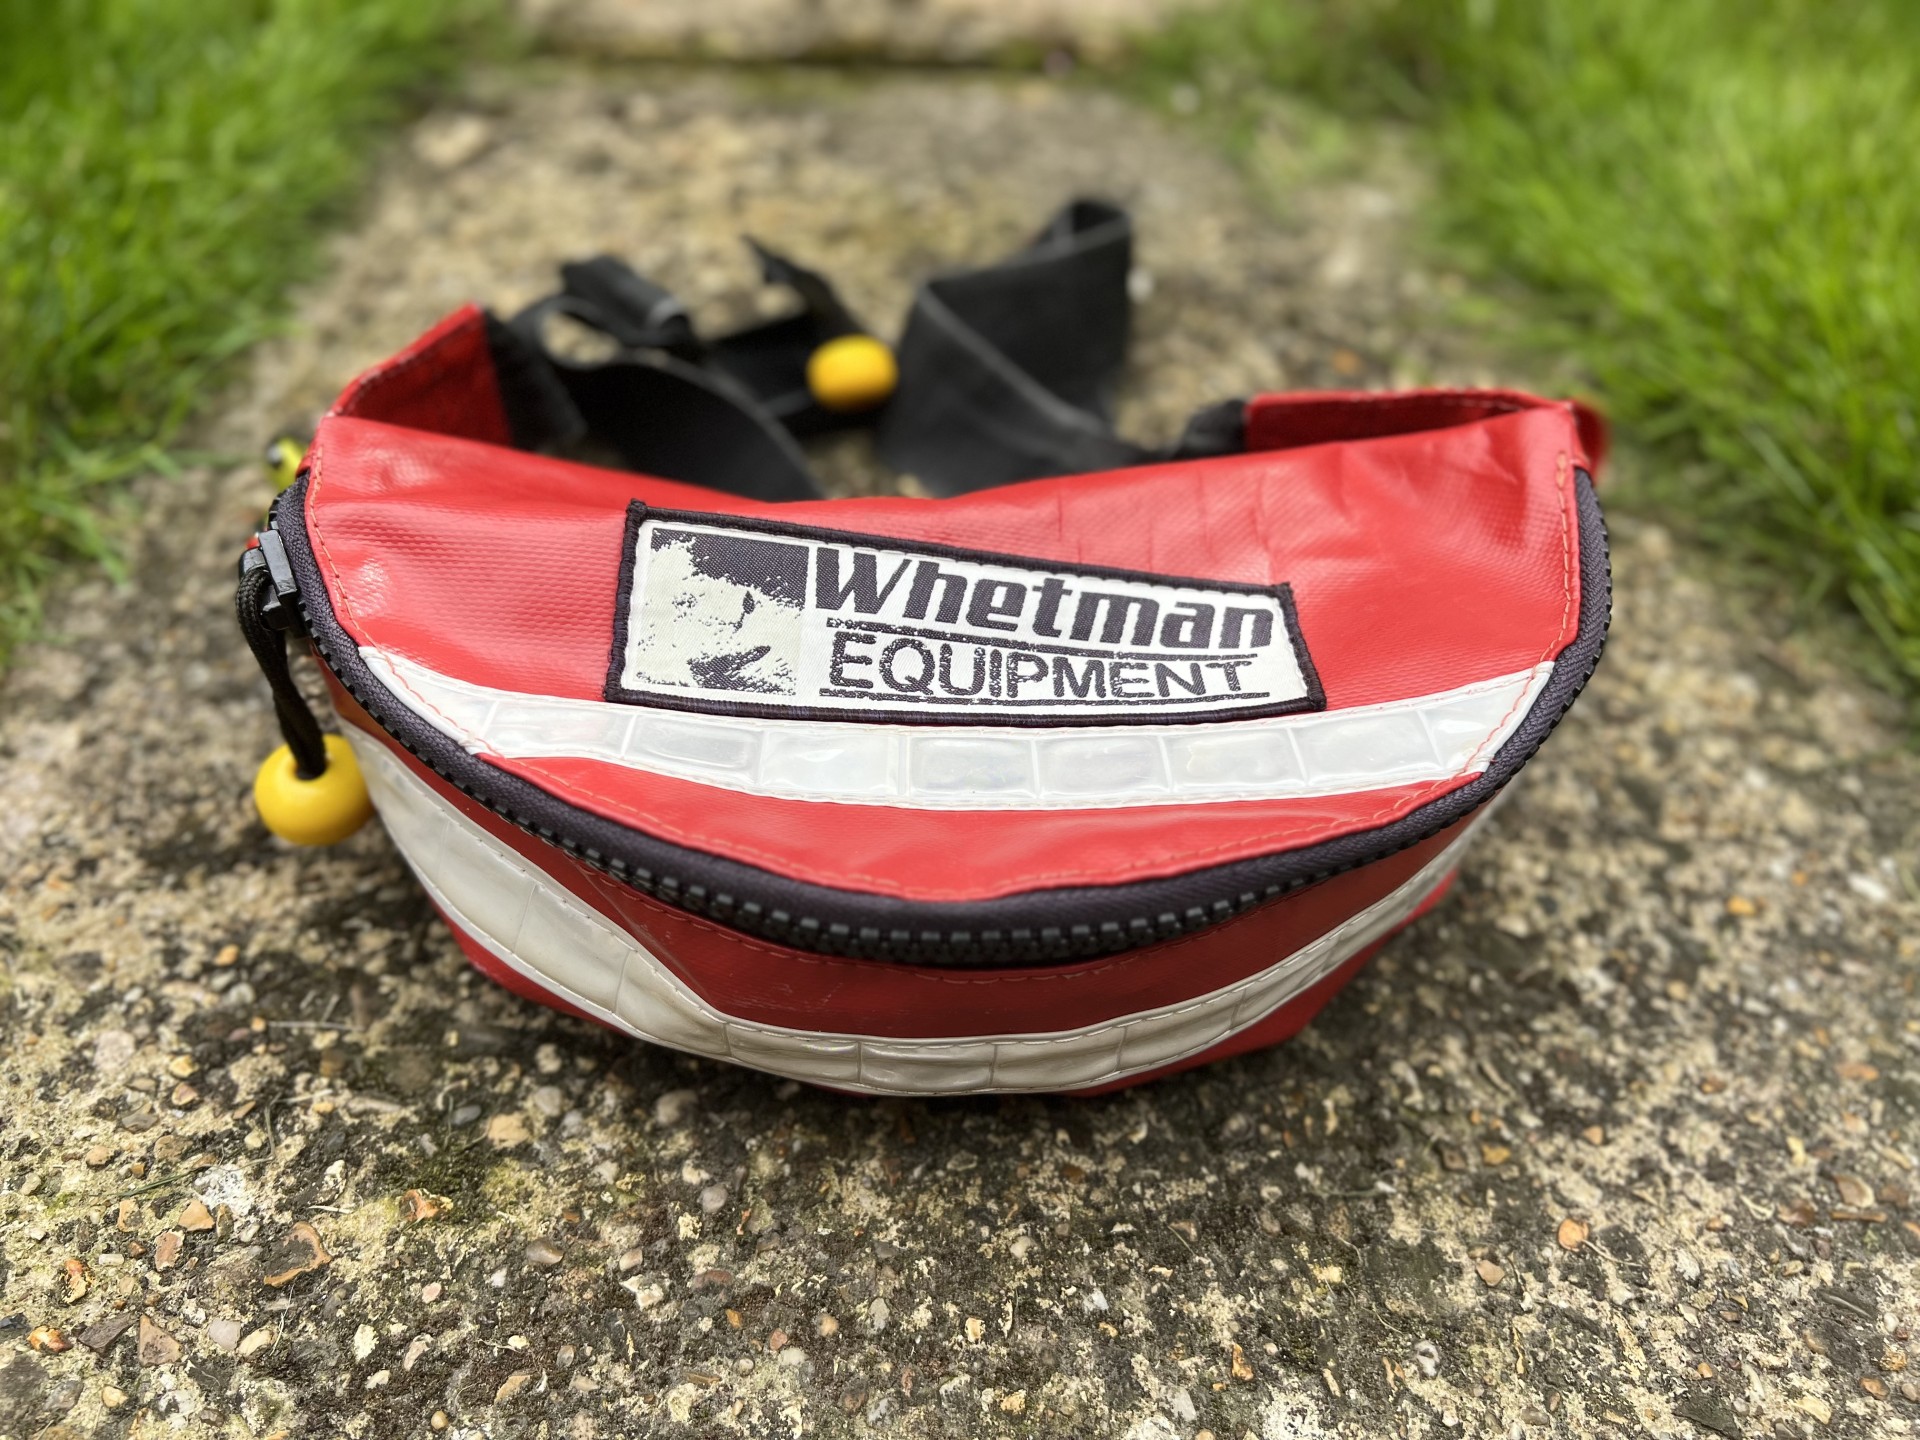 A practical large bag and zip for easy repacking of wet rope.